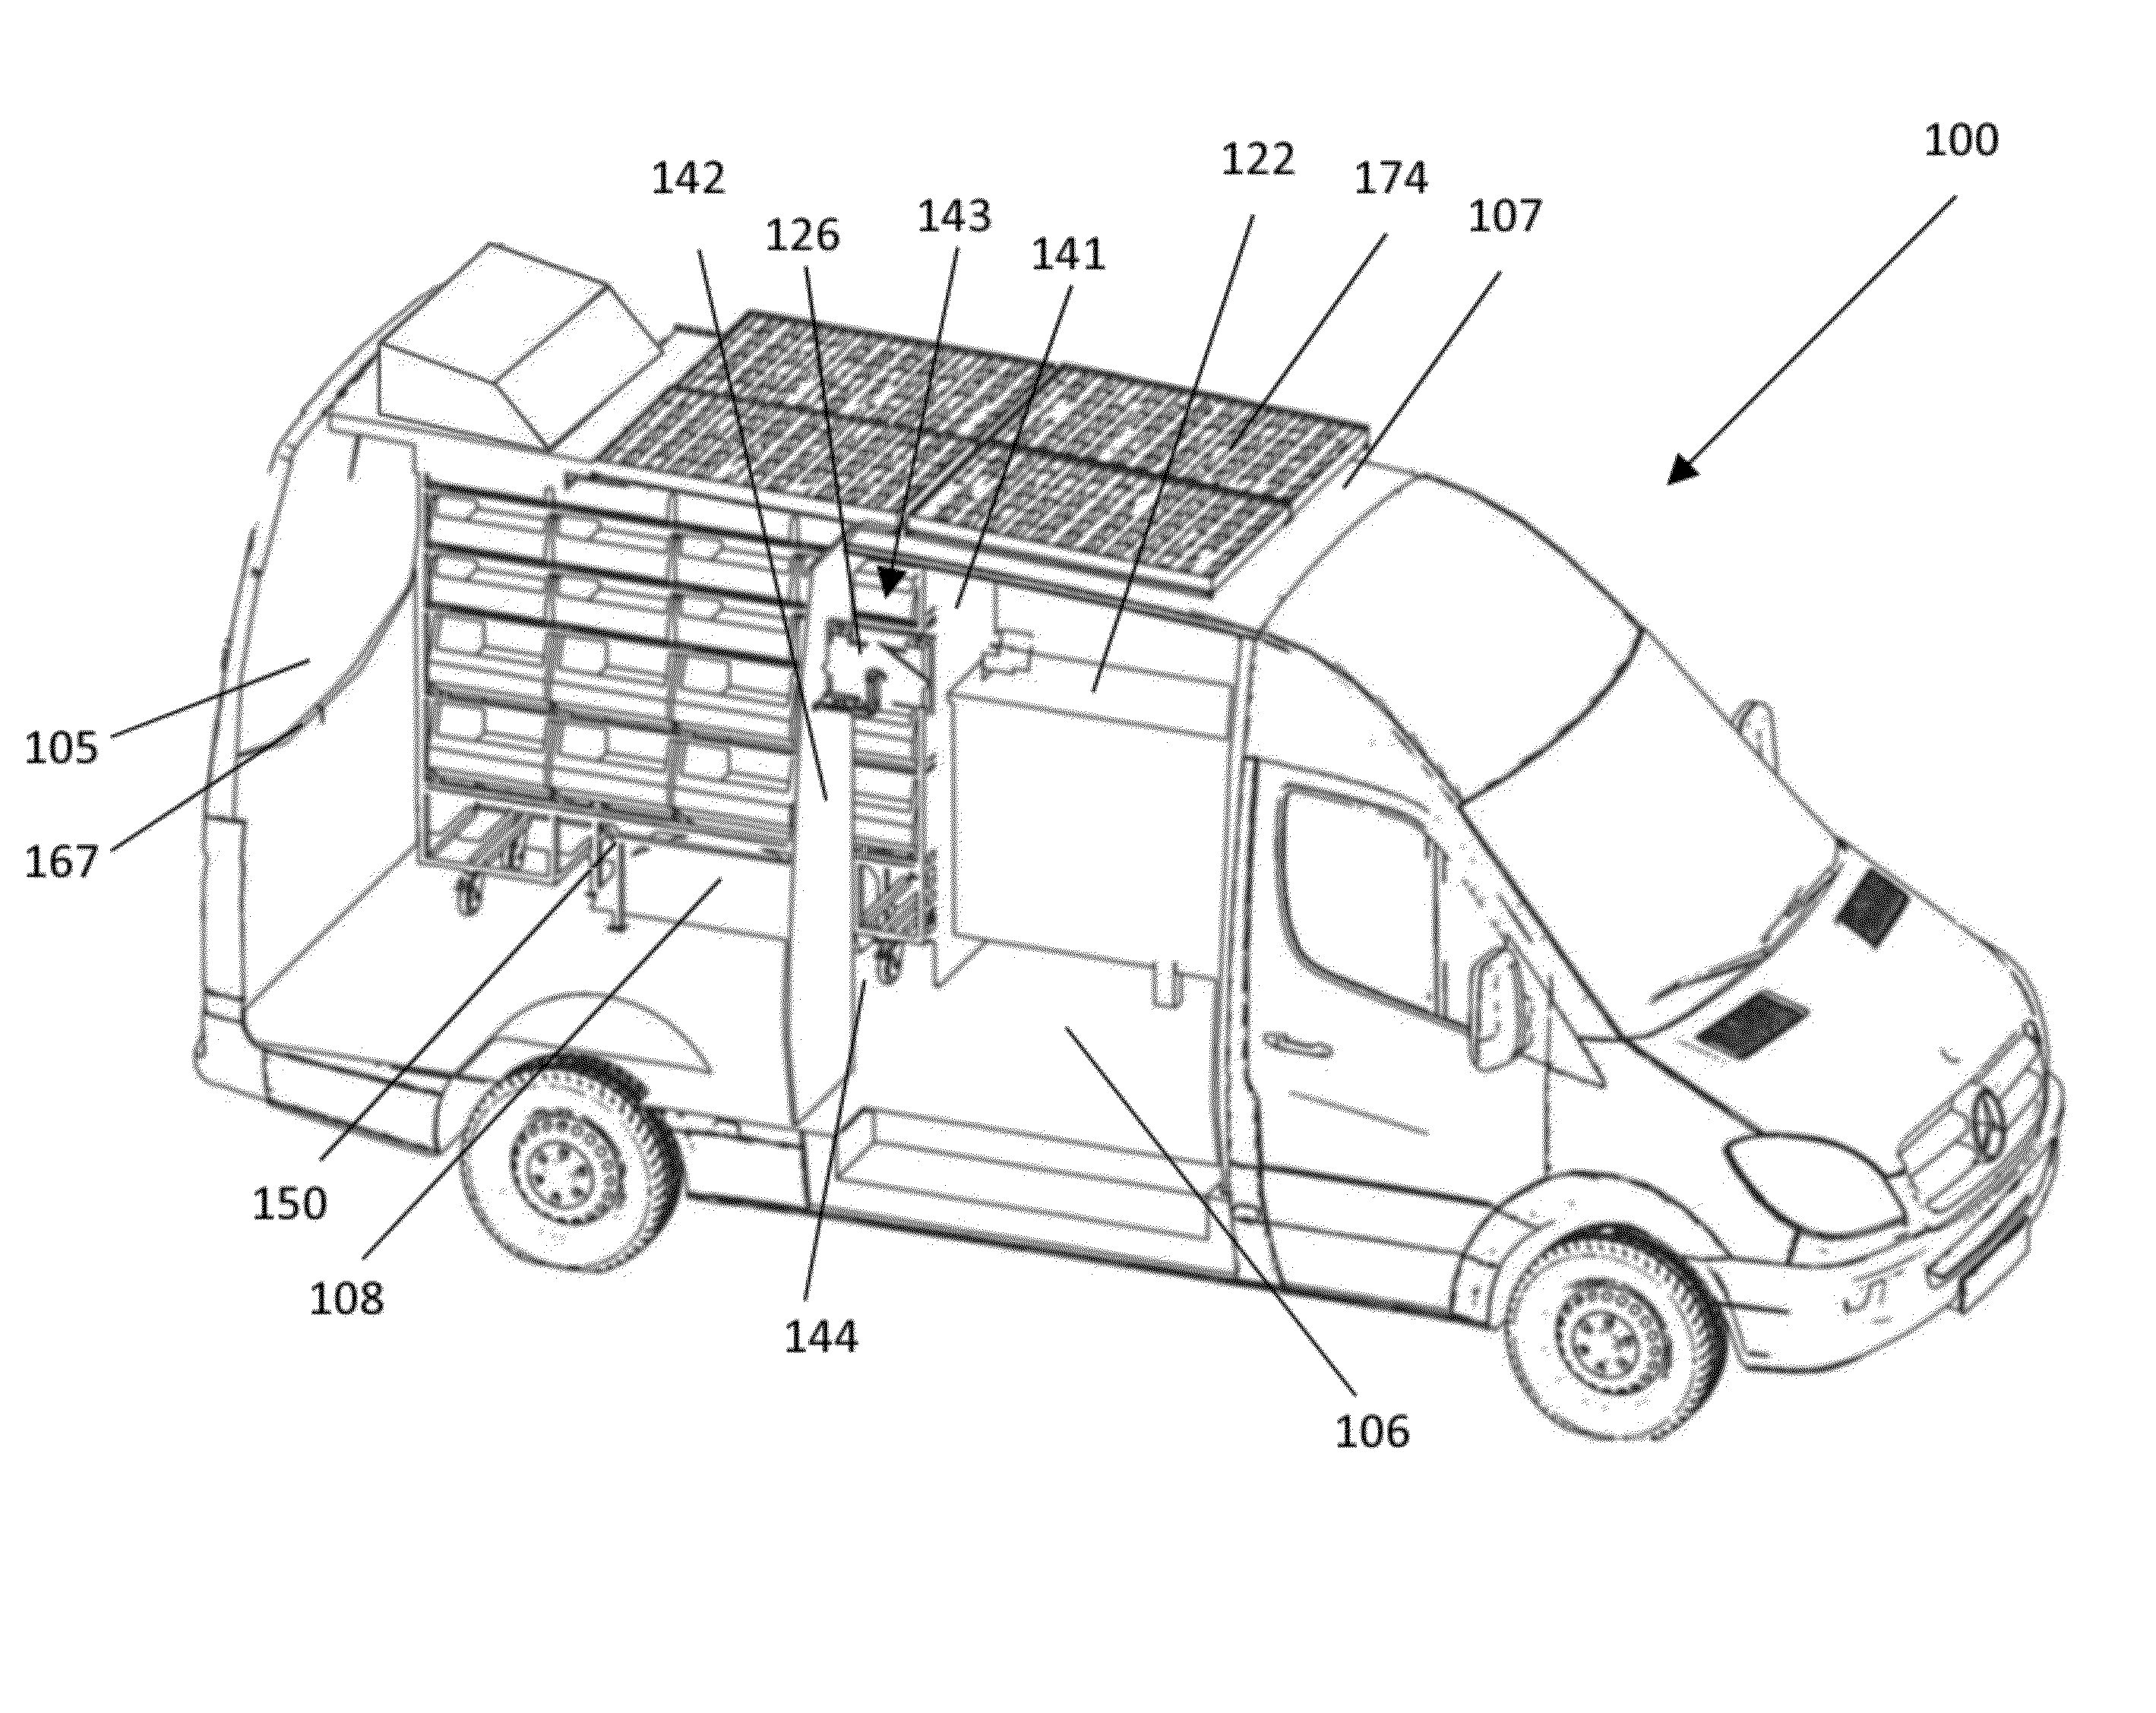 Mobile product retail system and methods thereof